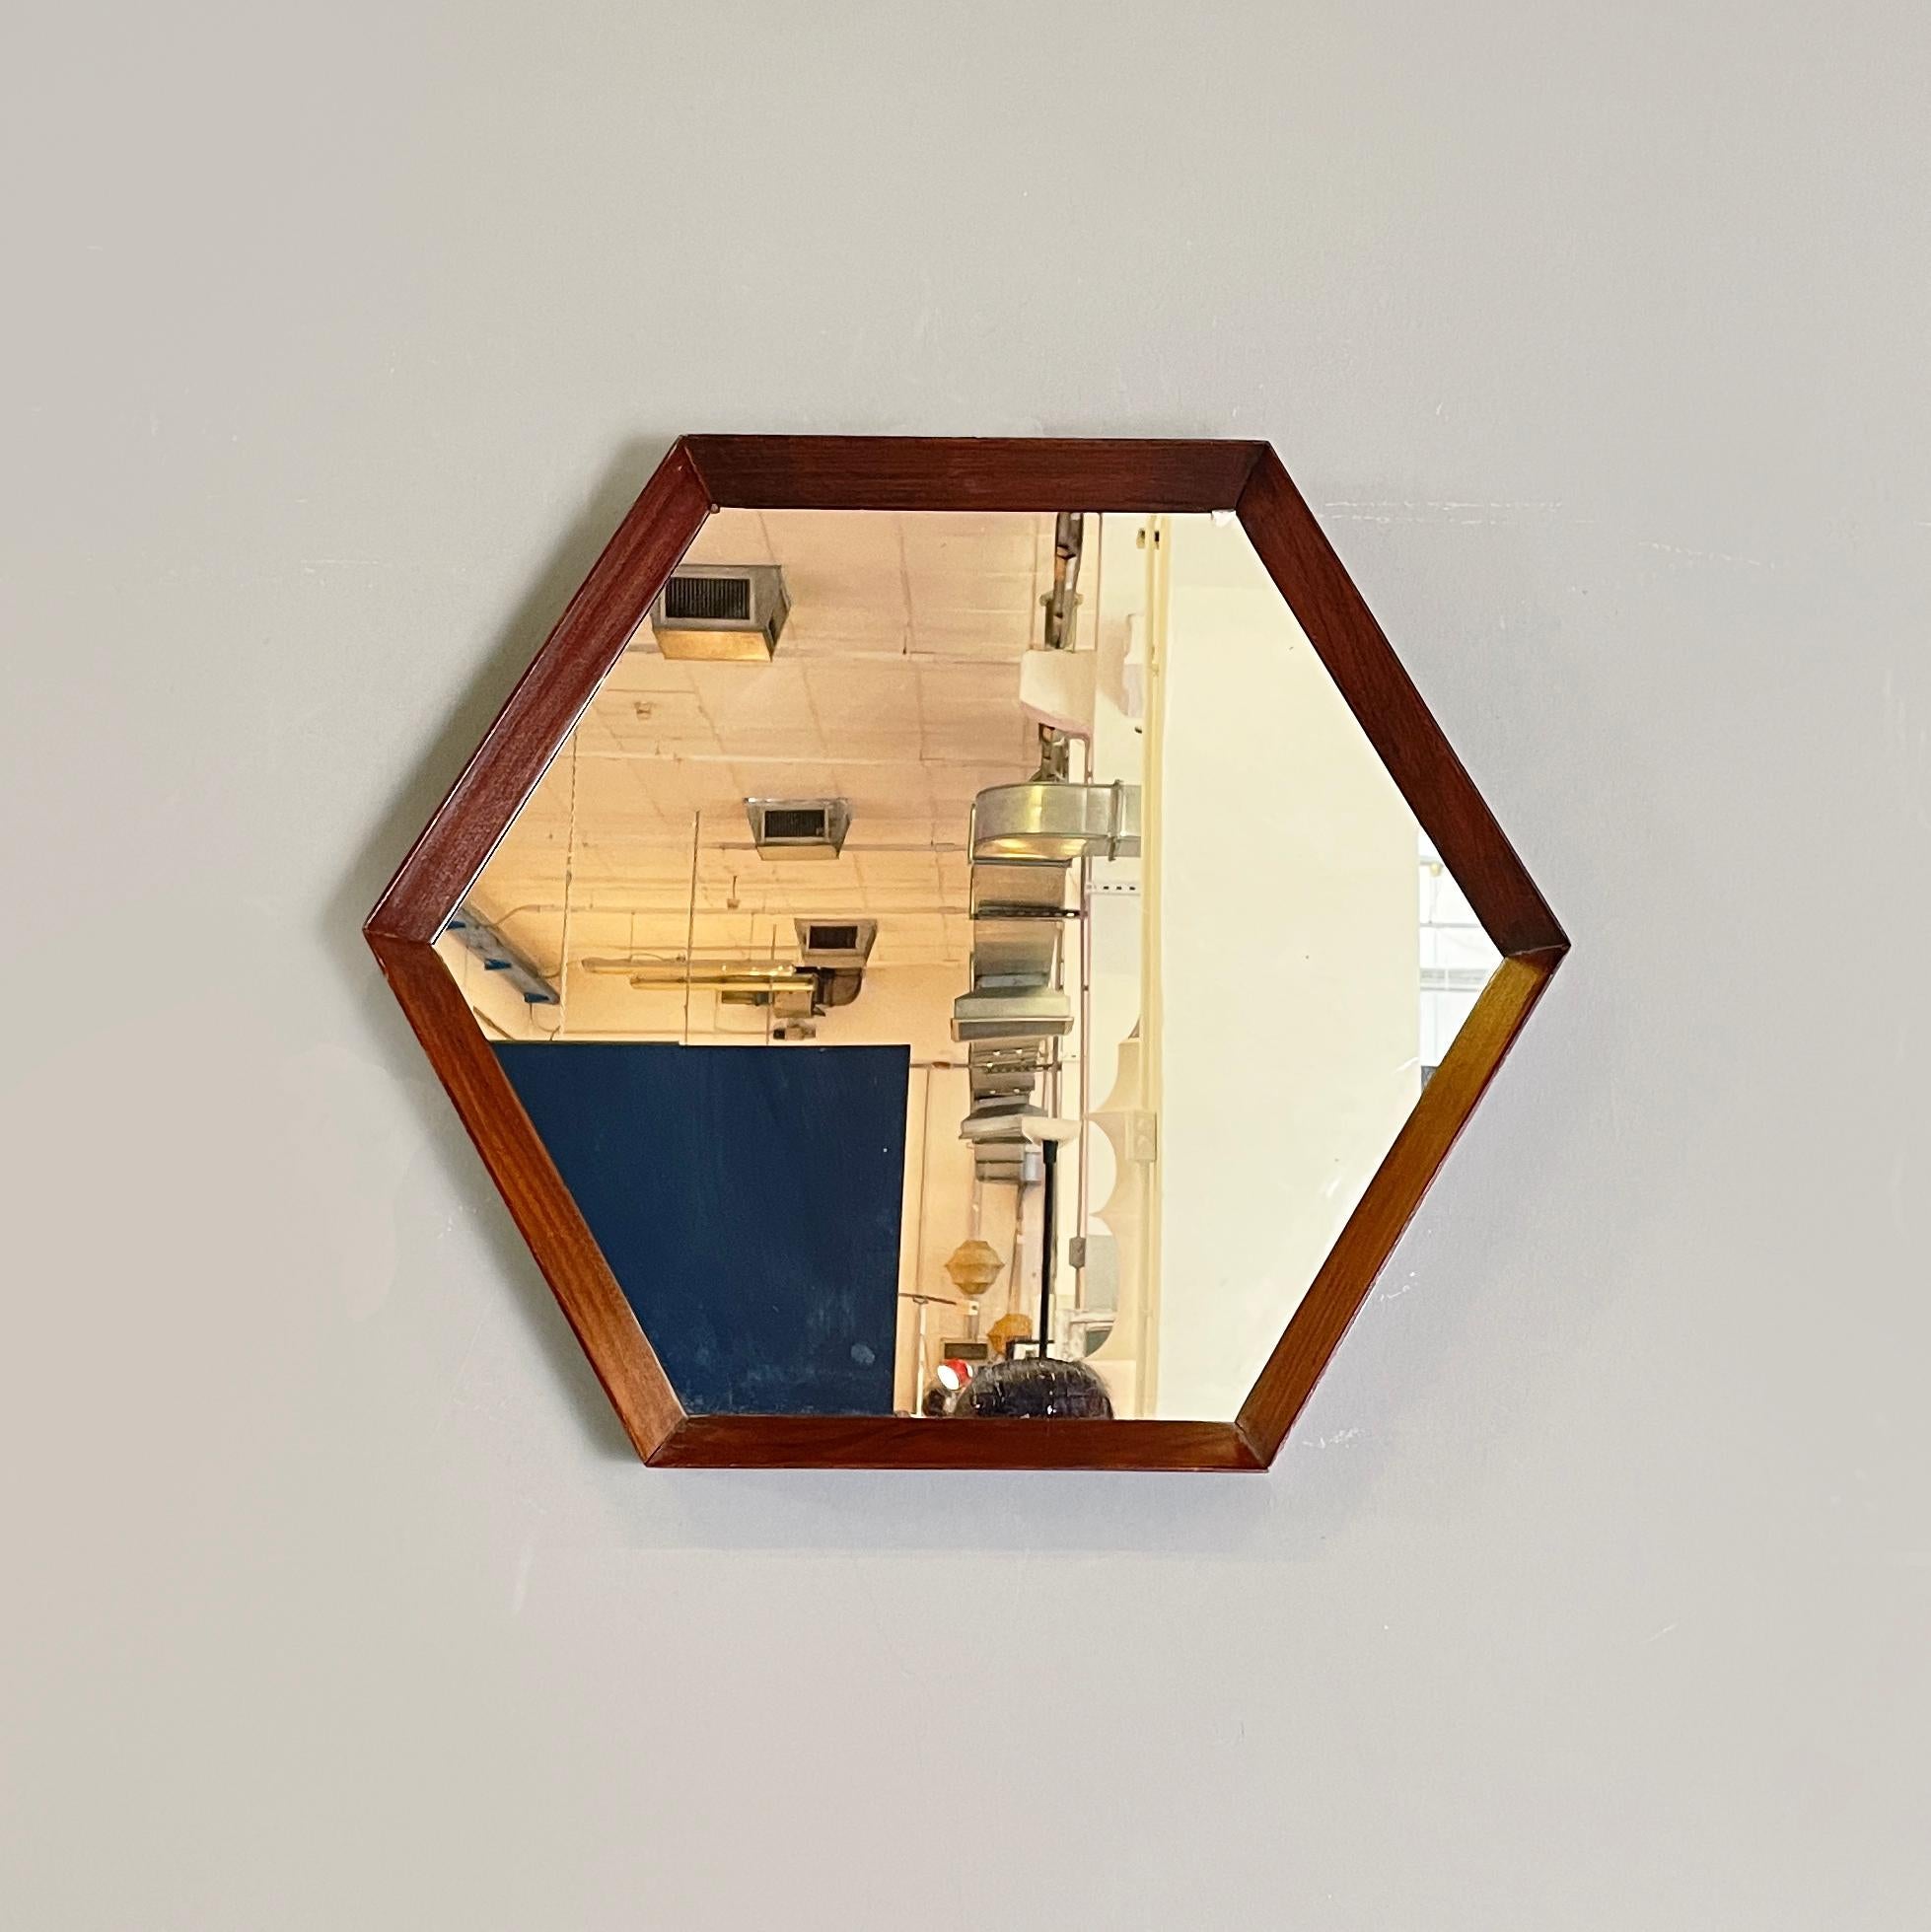 Italian mid-century Hexagonal wall mirror with wooden frame, 1960s
Hexagonal shaped wall mirror with thick wooden frame. The frame is made up of 6 dark solid wood strips. At the top there is a triangular metal hook for hanging.
It came from 1960